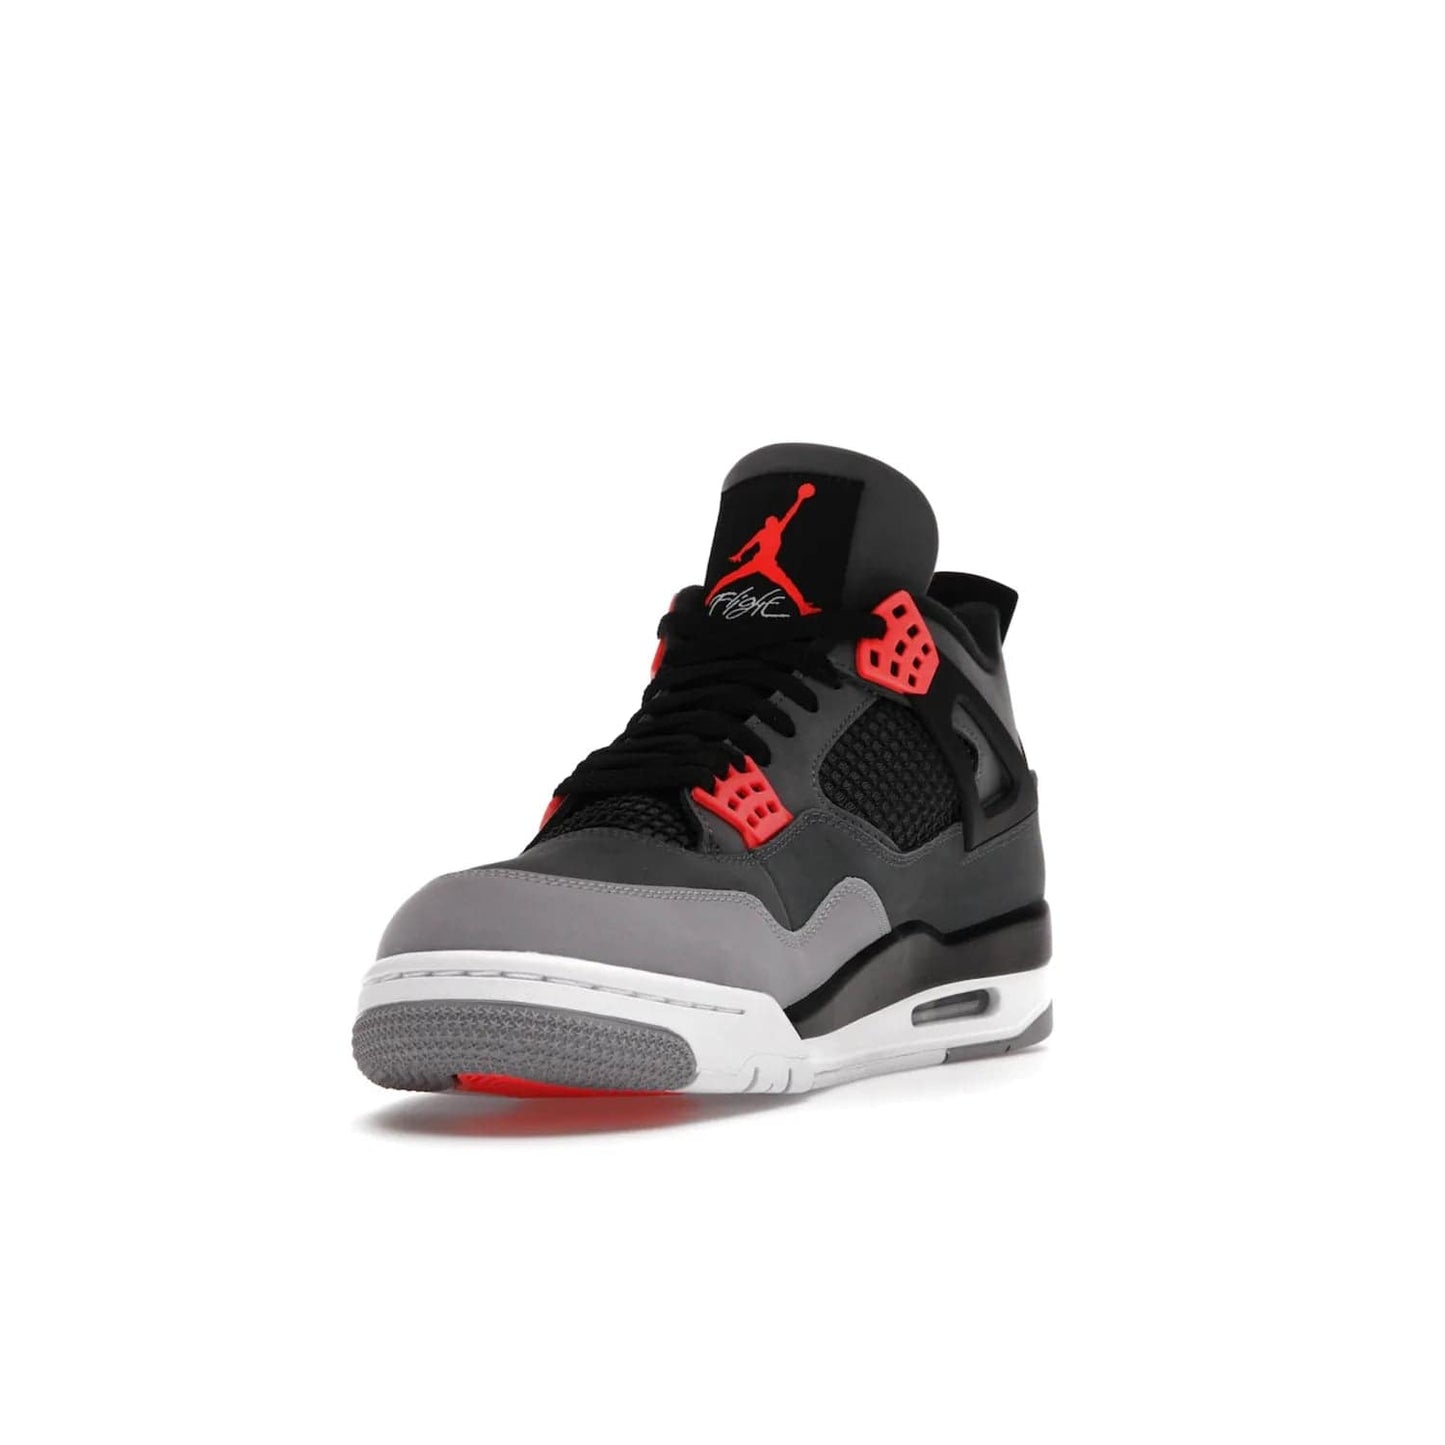 Jordan 4 Retro Infrared - Image 13 - Only at www.BallersClubKickz.com - Introducing the classic & timeless Air Jordan 4 Infrared. Durabuck upper, TPU mesh inserts, tech straps & heel tabs in dark grey and infrared accents. White sole with visible Air units. Out June 15, 2022. Get your pair now!